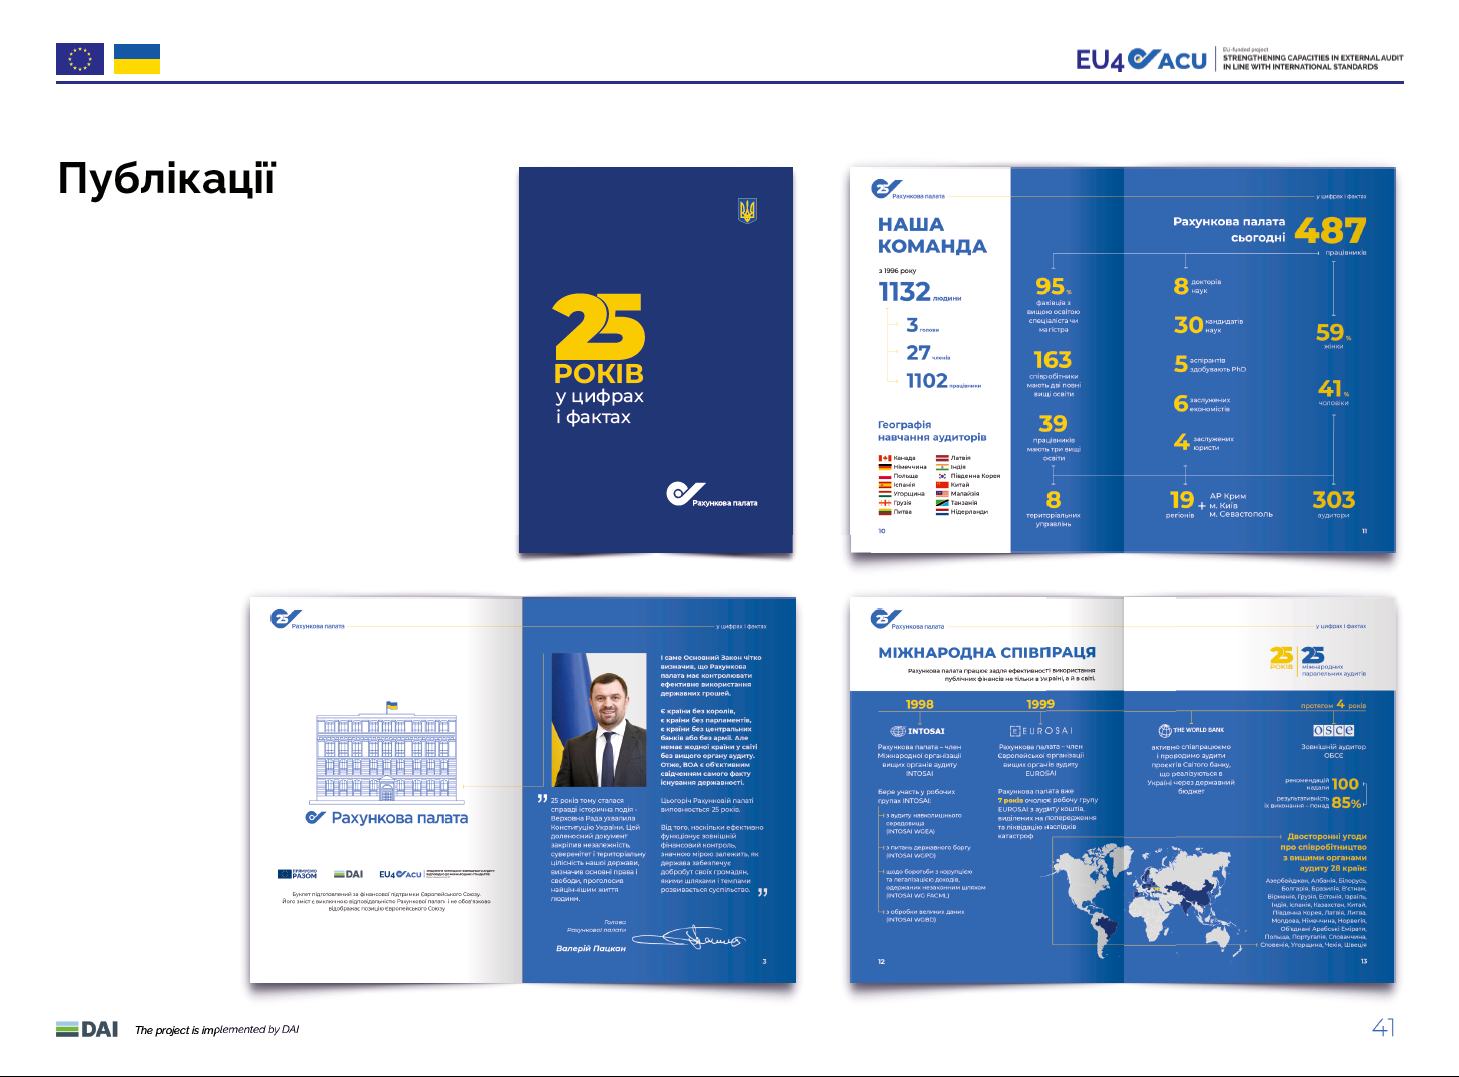 EU4ACU project developed a Brandbook for the Accounting Chamber of Ukraine and will help employees to use it